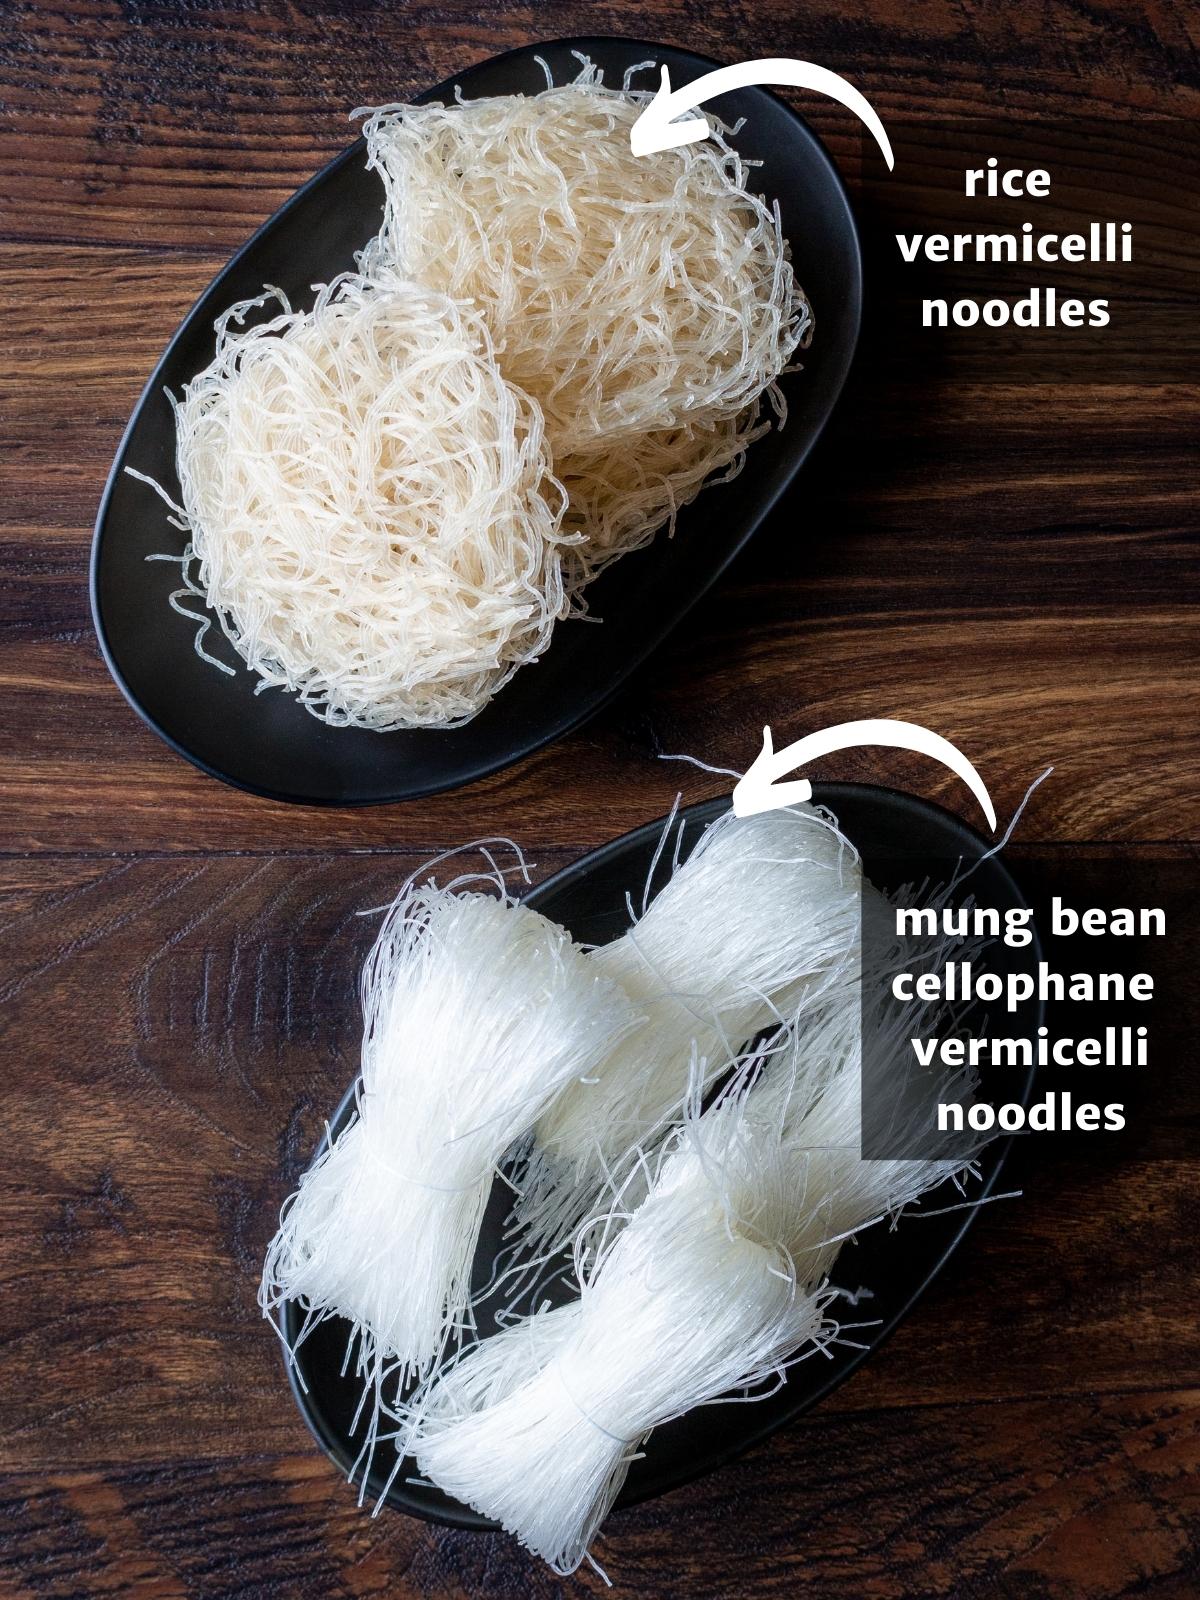 A comparison photo showing the difference between rice vermicelli compared to mung bean vermicelli.